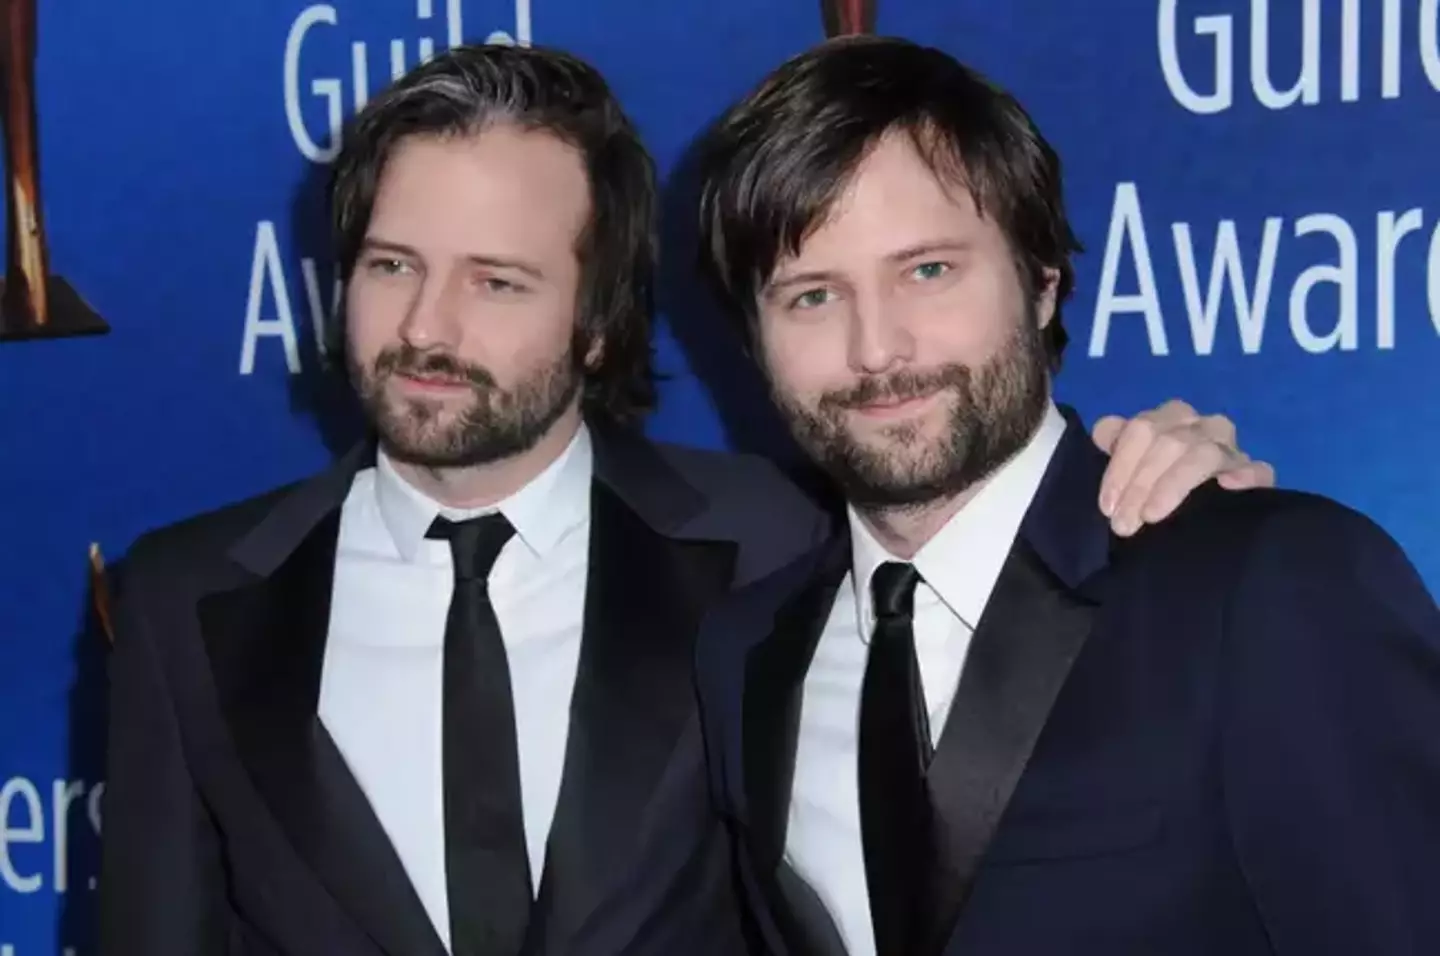 The Duffer brothers have said they always wanted to do an animated series of Stranger Things.